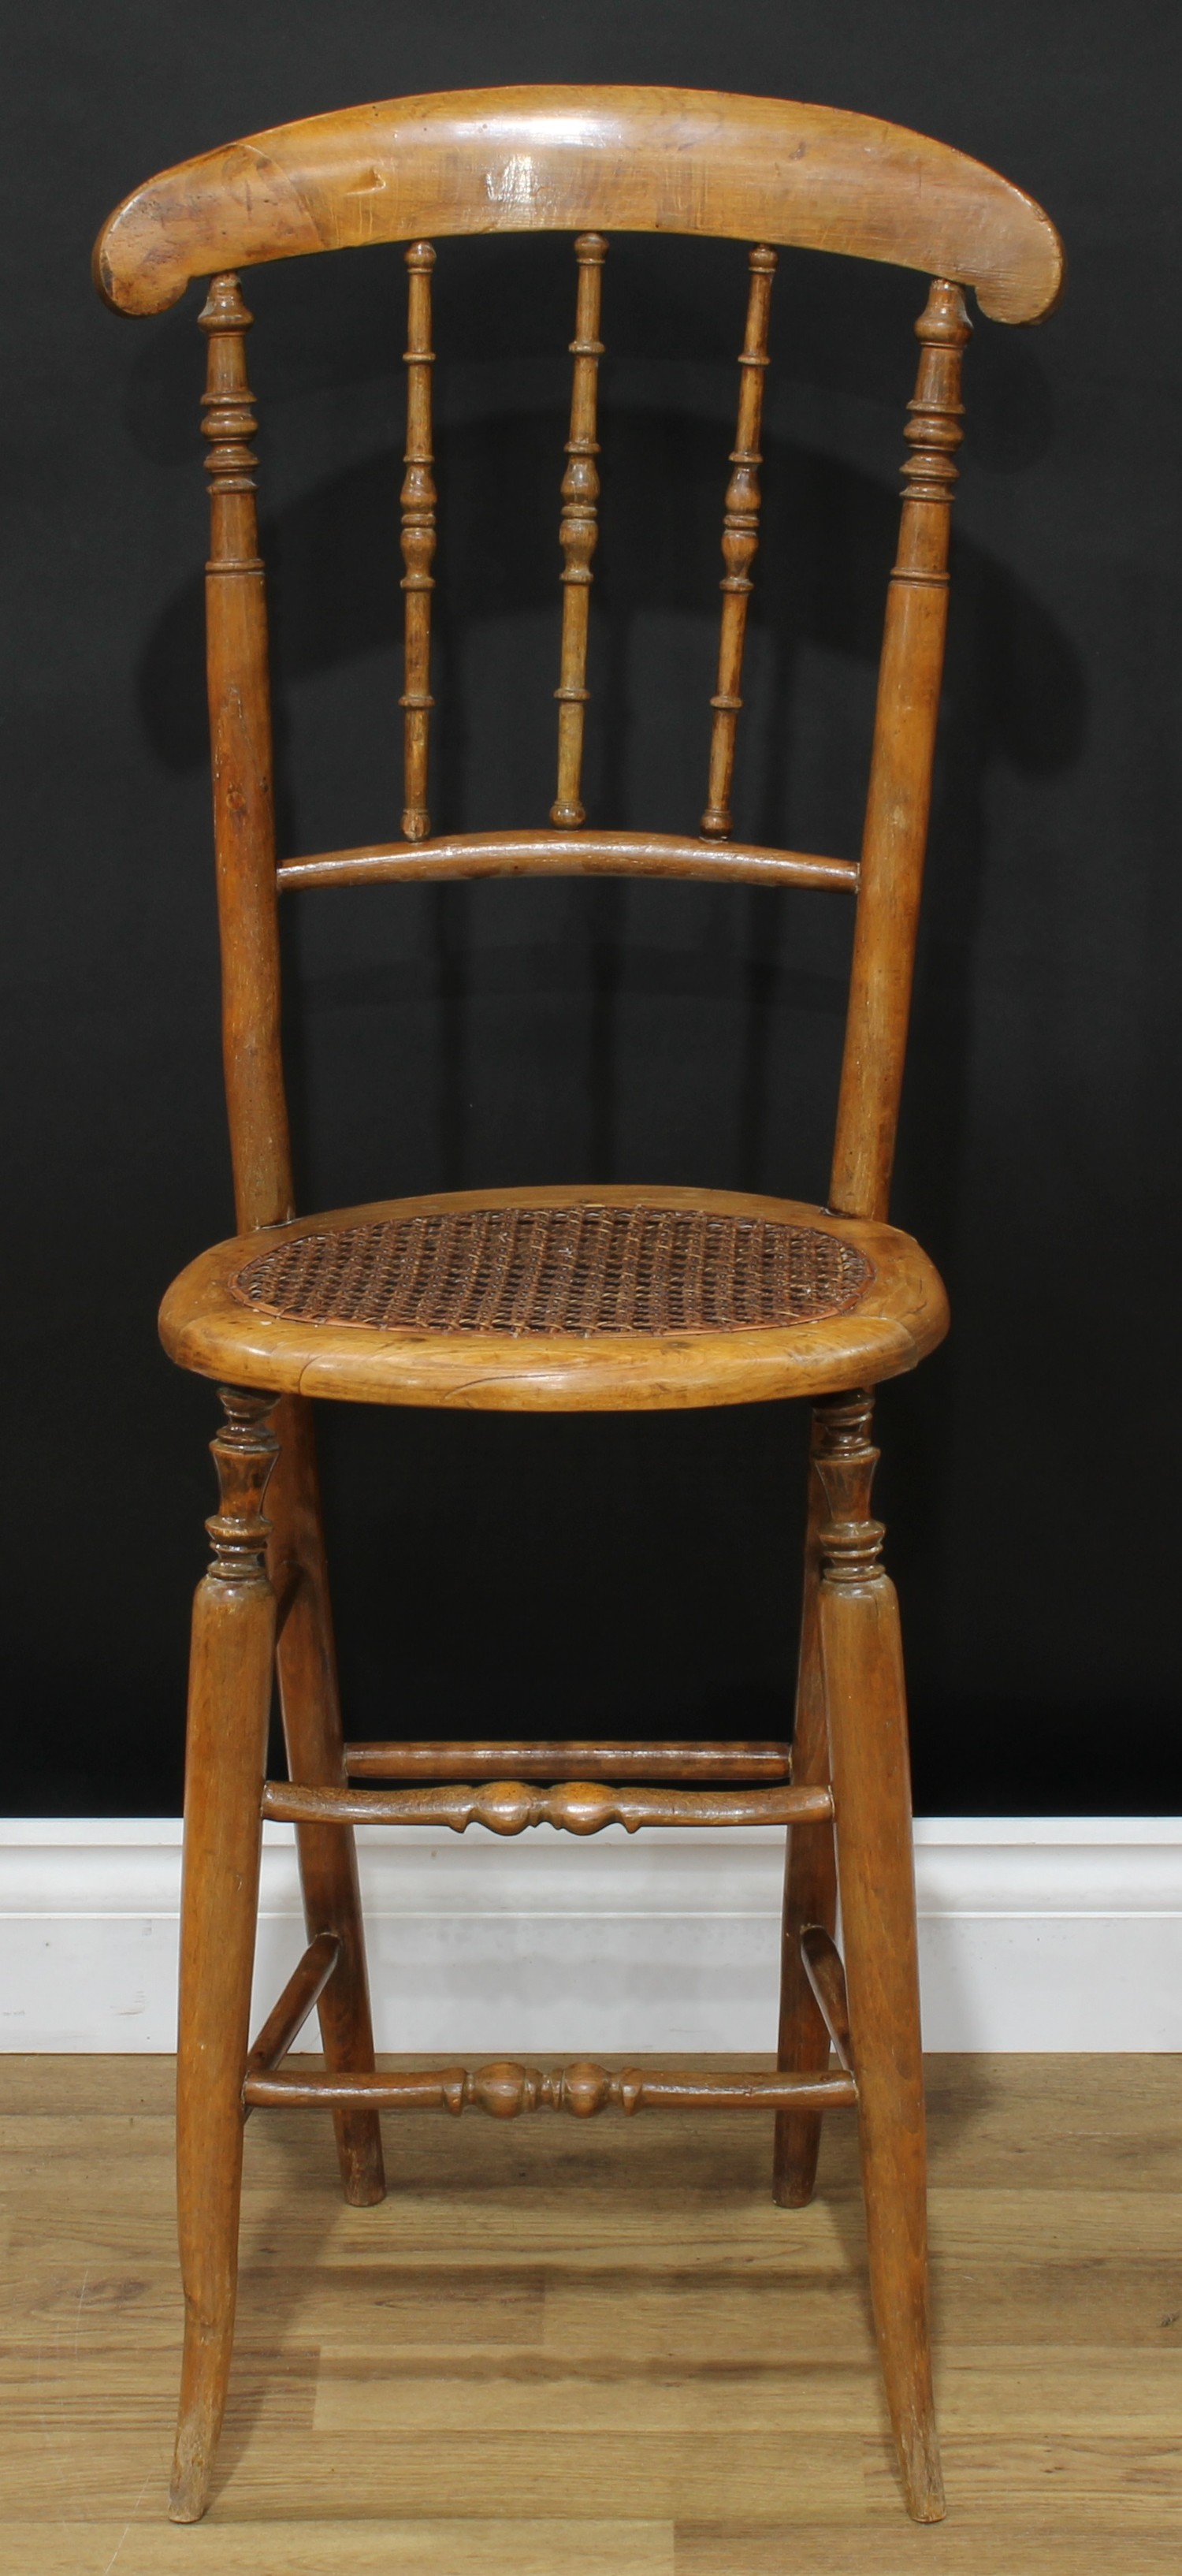 A Victorian beech child's correction chair, curved cresting rail, turned spindle back, oval cane